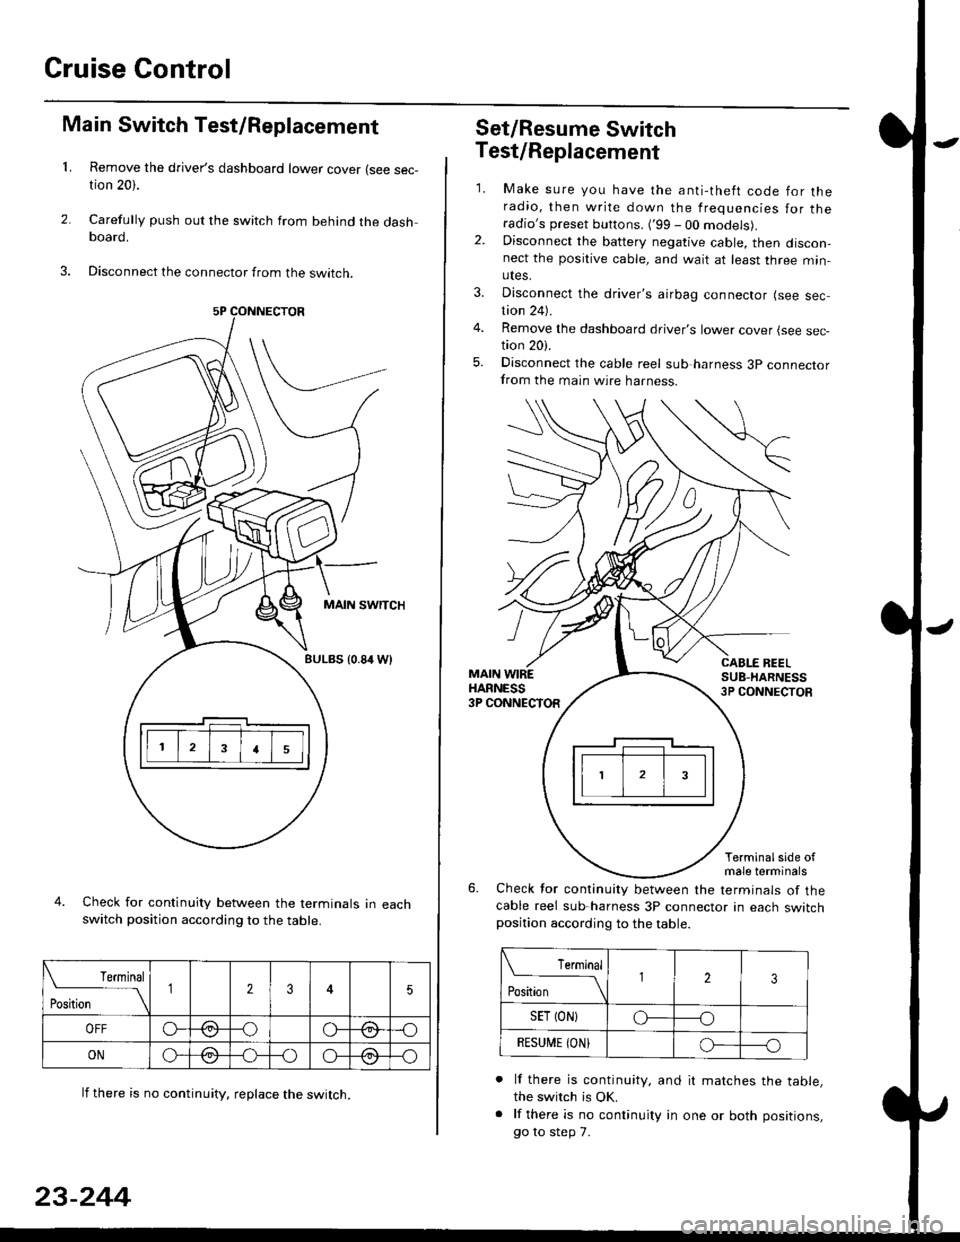 HONDA CIVIC 2000 6.G Workshop Manual Cruise Gontrol
3.
1.
2.
Main Switch Test/Replacement
Remove the drivers dashboard lower cover (see sec-tion 20).
Carefully push out the switch from behind the dashboard.
Disconnect the connector from